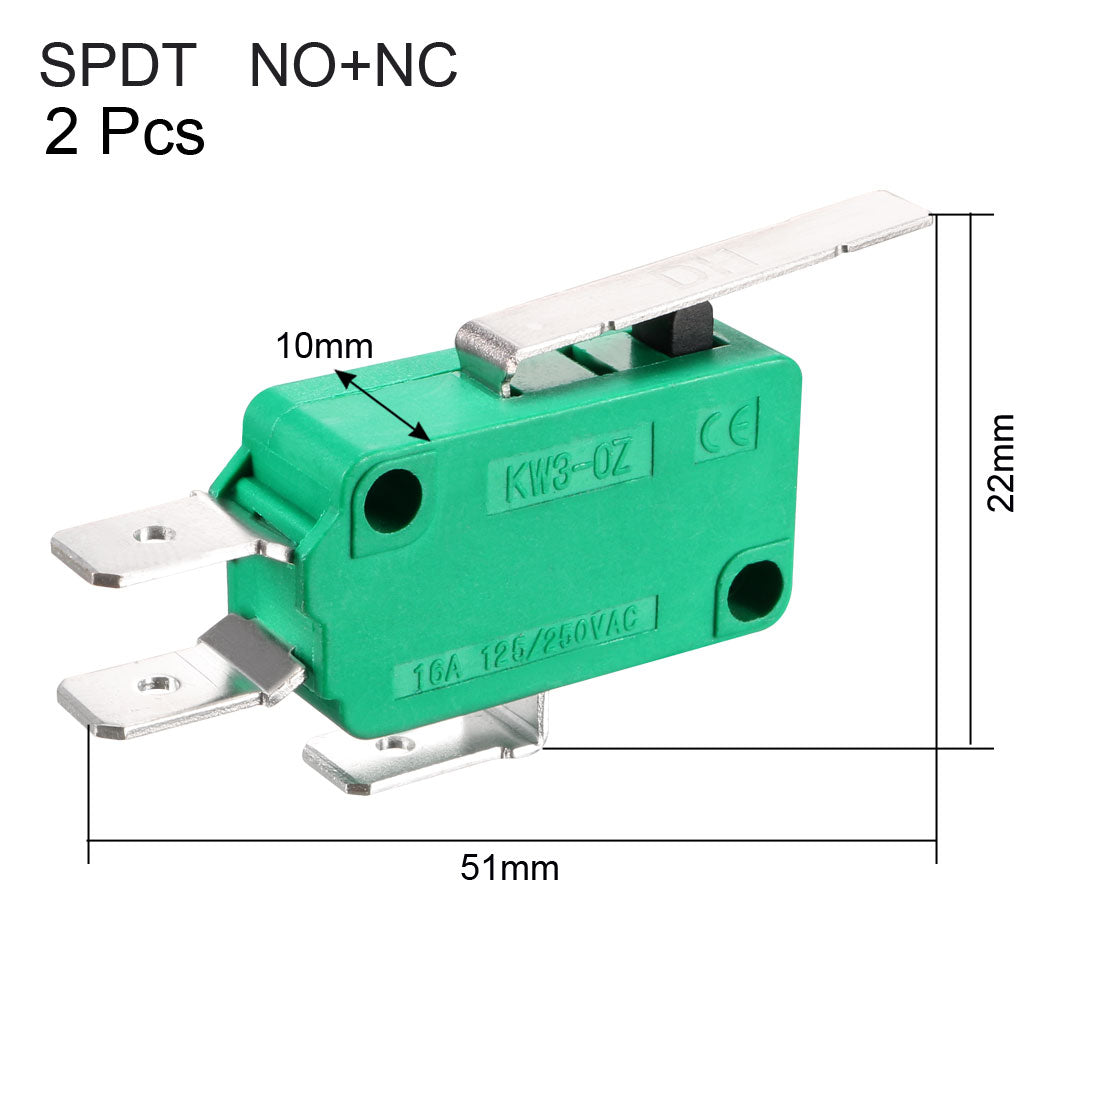 uxcell Uxcell 2PCS KW3-OZ 16A 125/250VAC SPDT NO NC Hinge Lever Type Micro Limit Switches